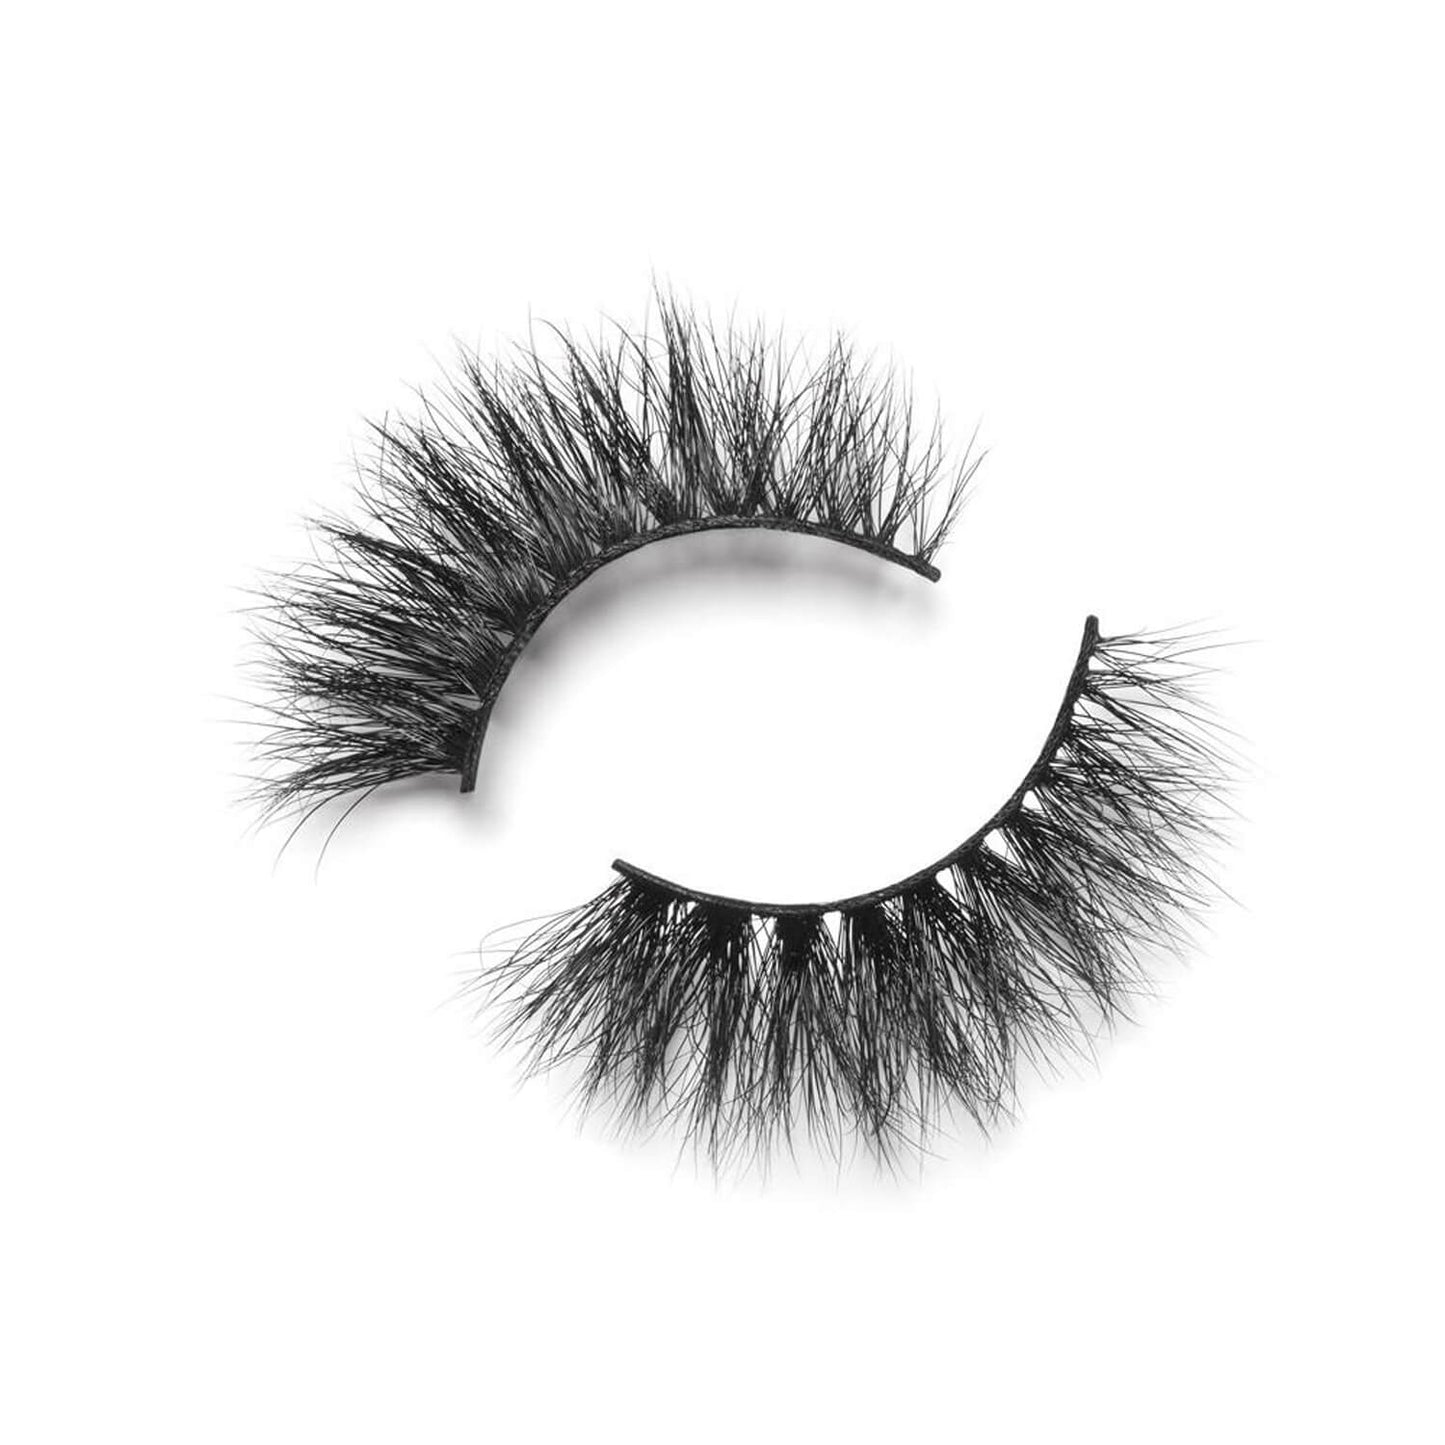 Lilly Lashes Carmel 3D Mink Lashes